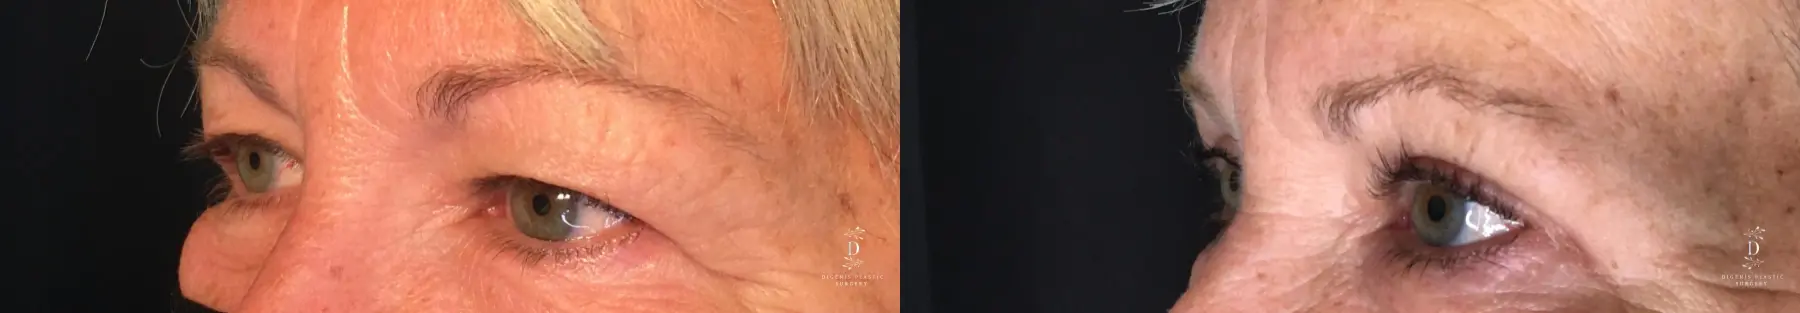 Eyelid Surgery: Patient 33 - Before and After 4